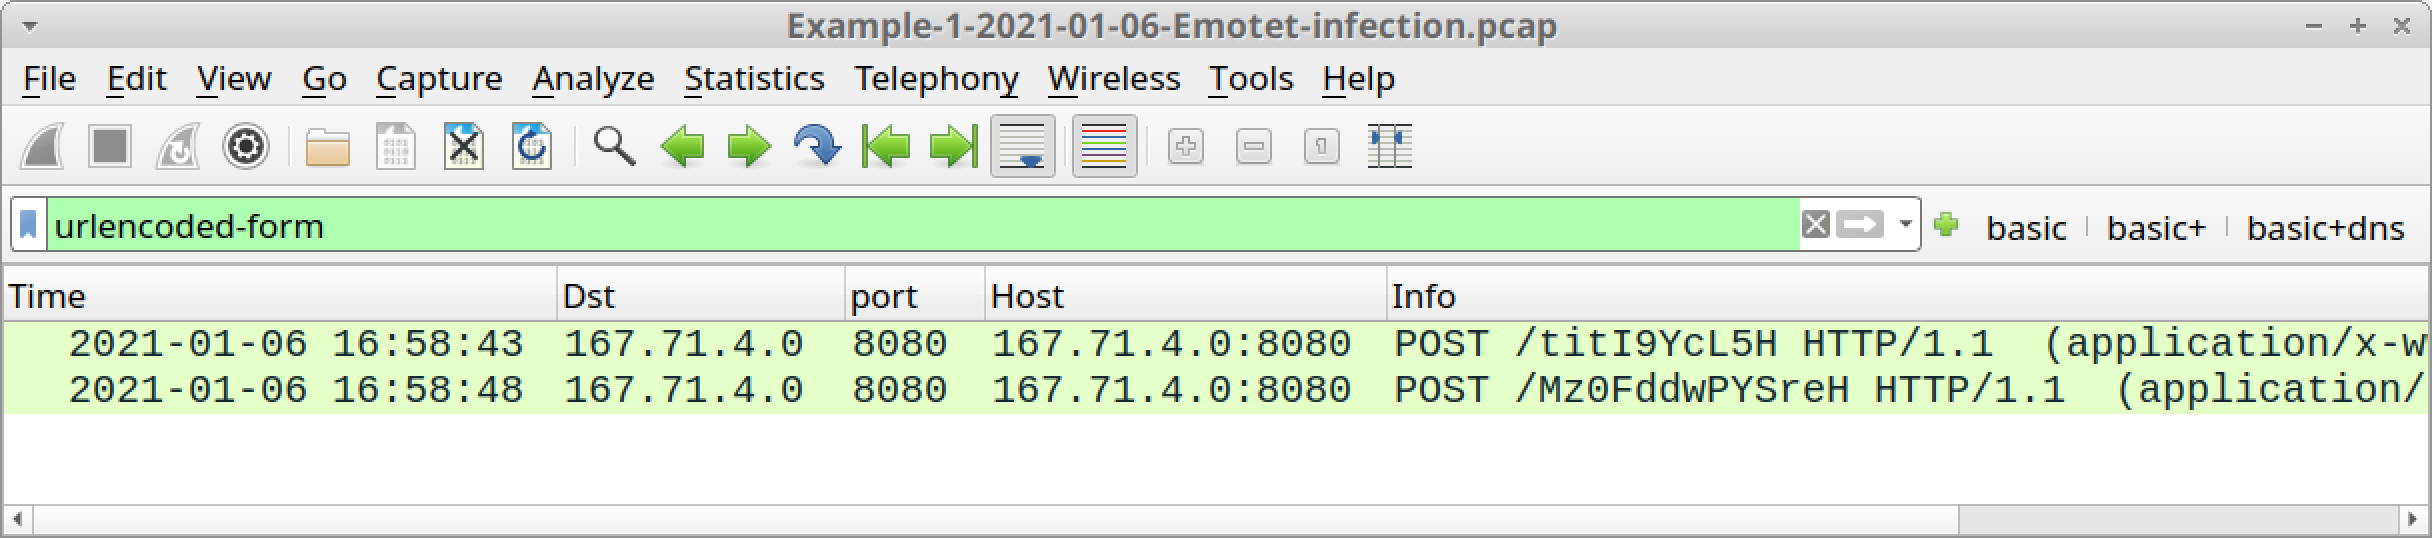 Figure 14. Filtering for the second type of HTTP POST request in Emotet C2 traffic.